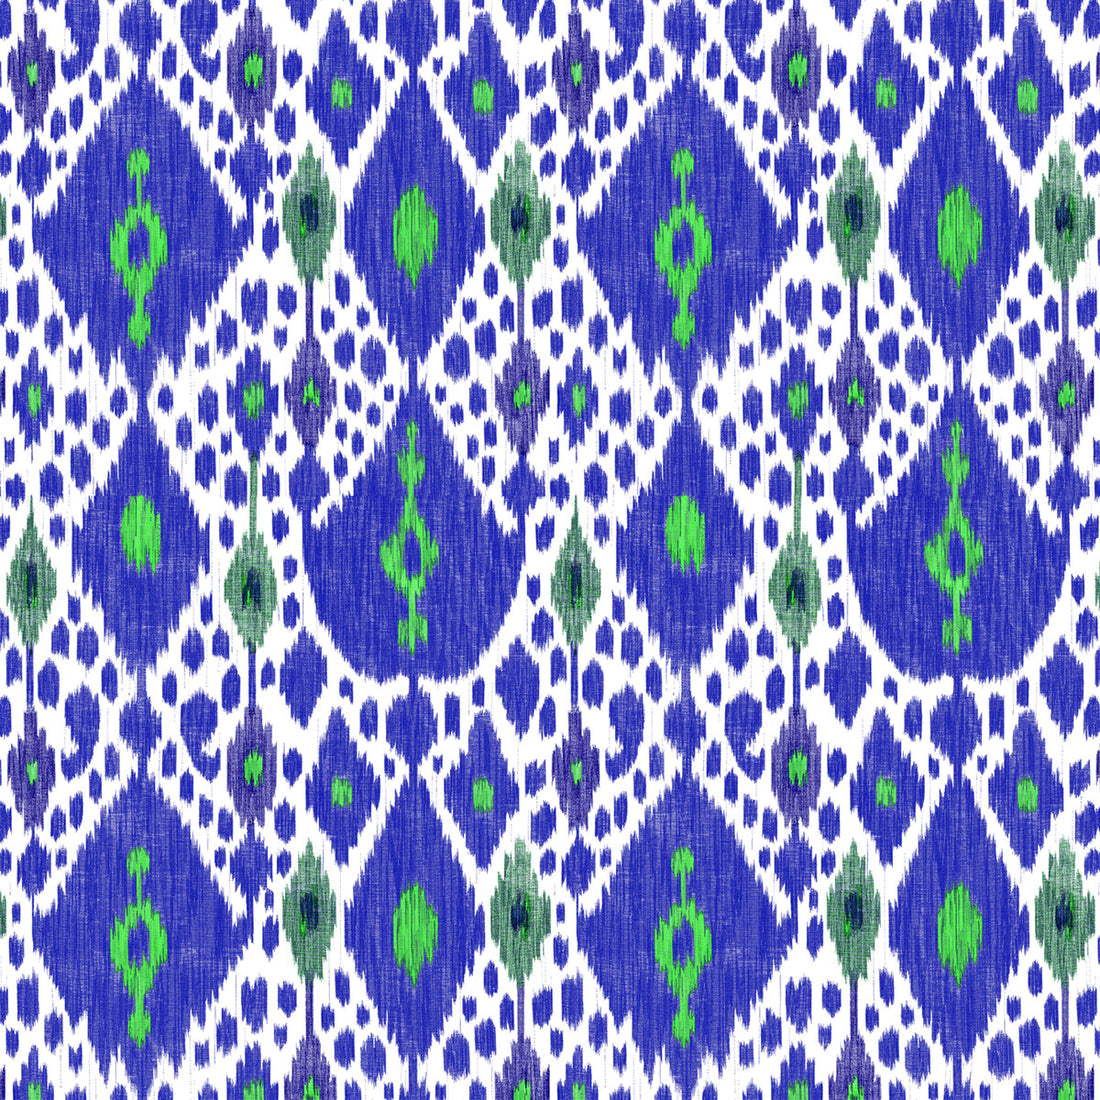 Ikat fabric in azul color - pattern GDT5542.001.0 - by Gaston y Daniela in the Gaston Libreria collection